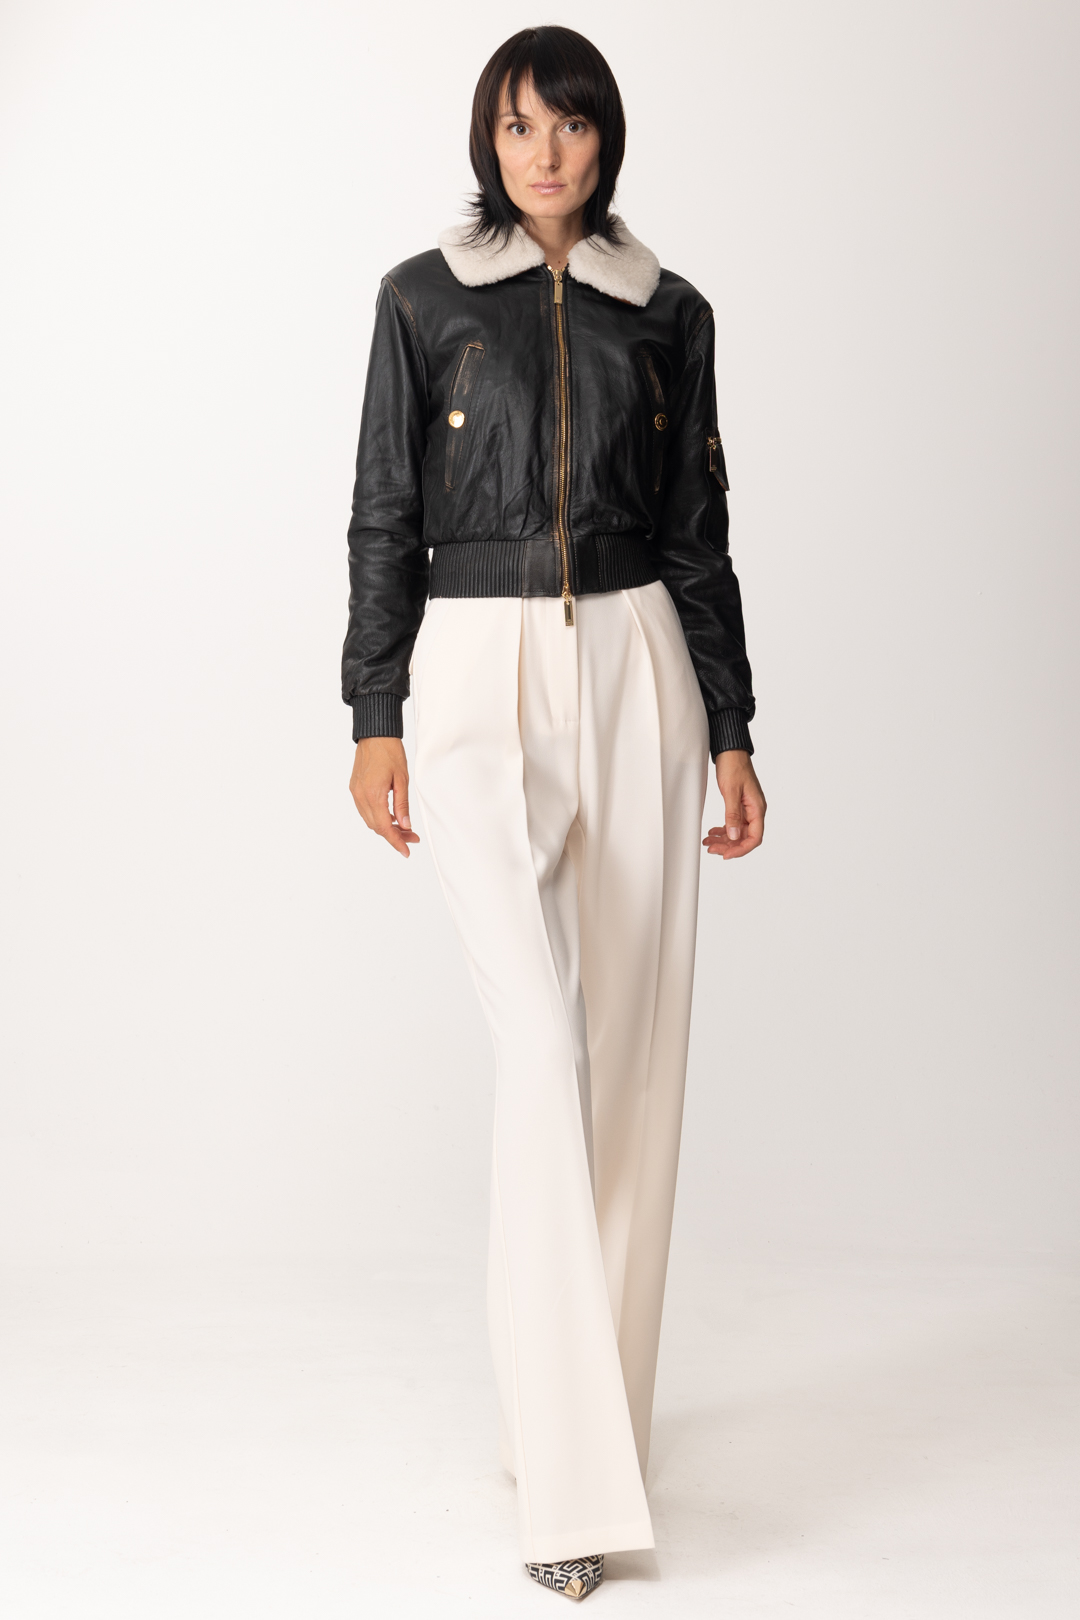 Preview: Elisabetta Franchi Bomber jacket in leather with sheepskin collar CUOIO SCURO